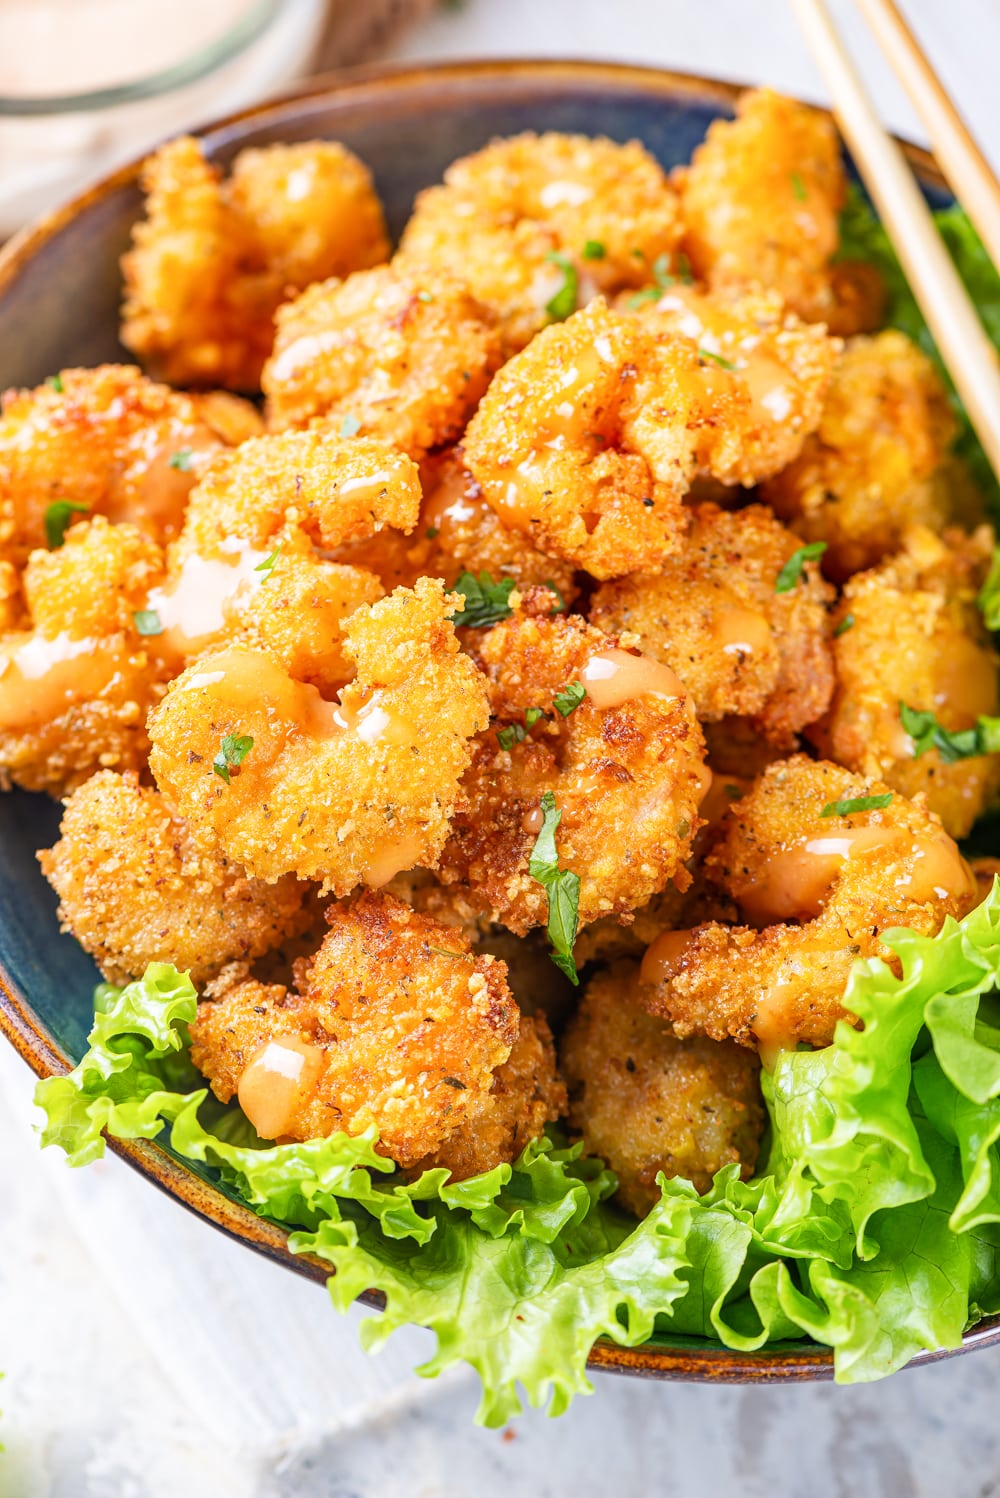 Bang bang shrimp in a blue bowl with a lettuce garnish at the front of the bowl. There is a set of chopsticks laying across the right rim of the bowl. The bowl is on a white counter top.